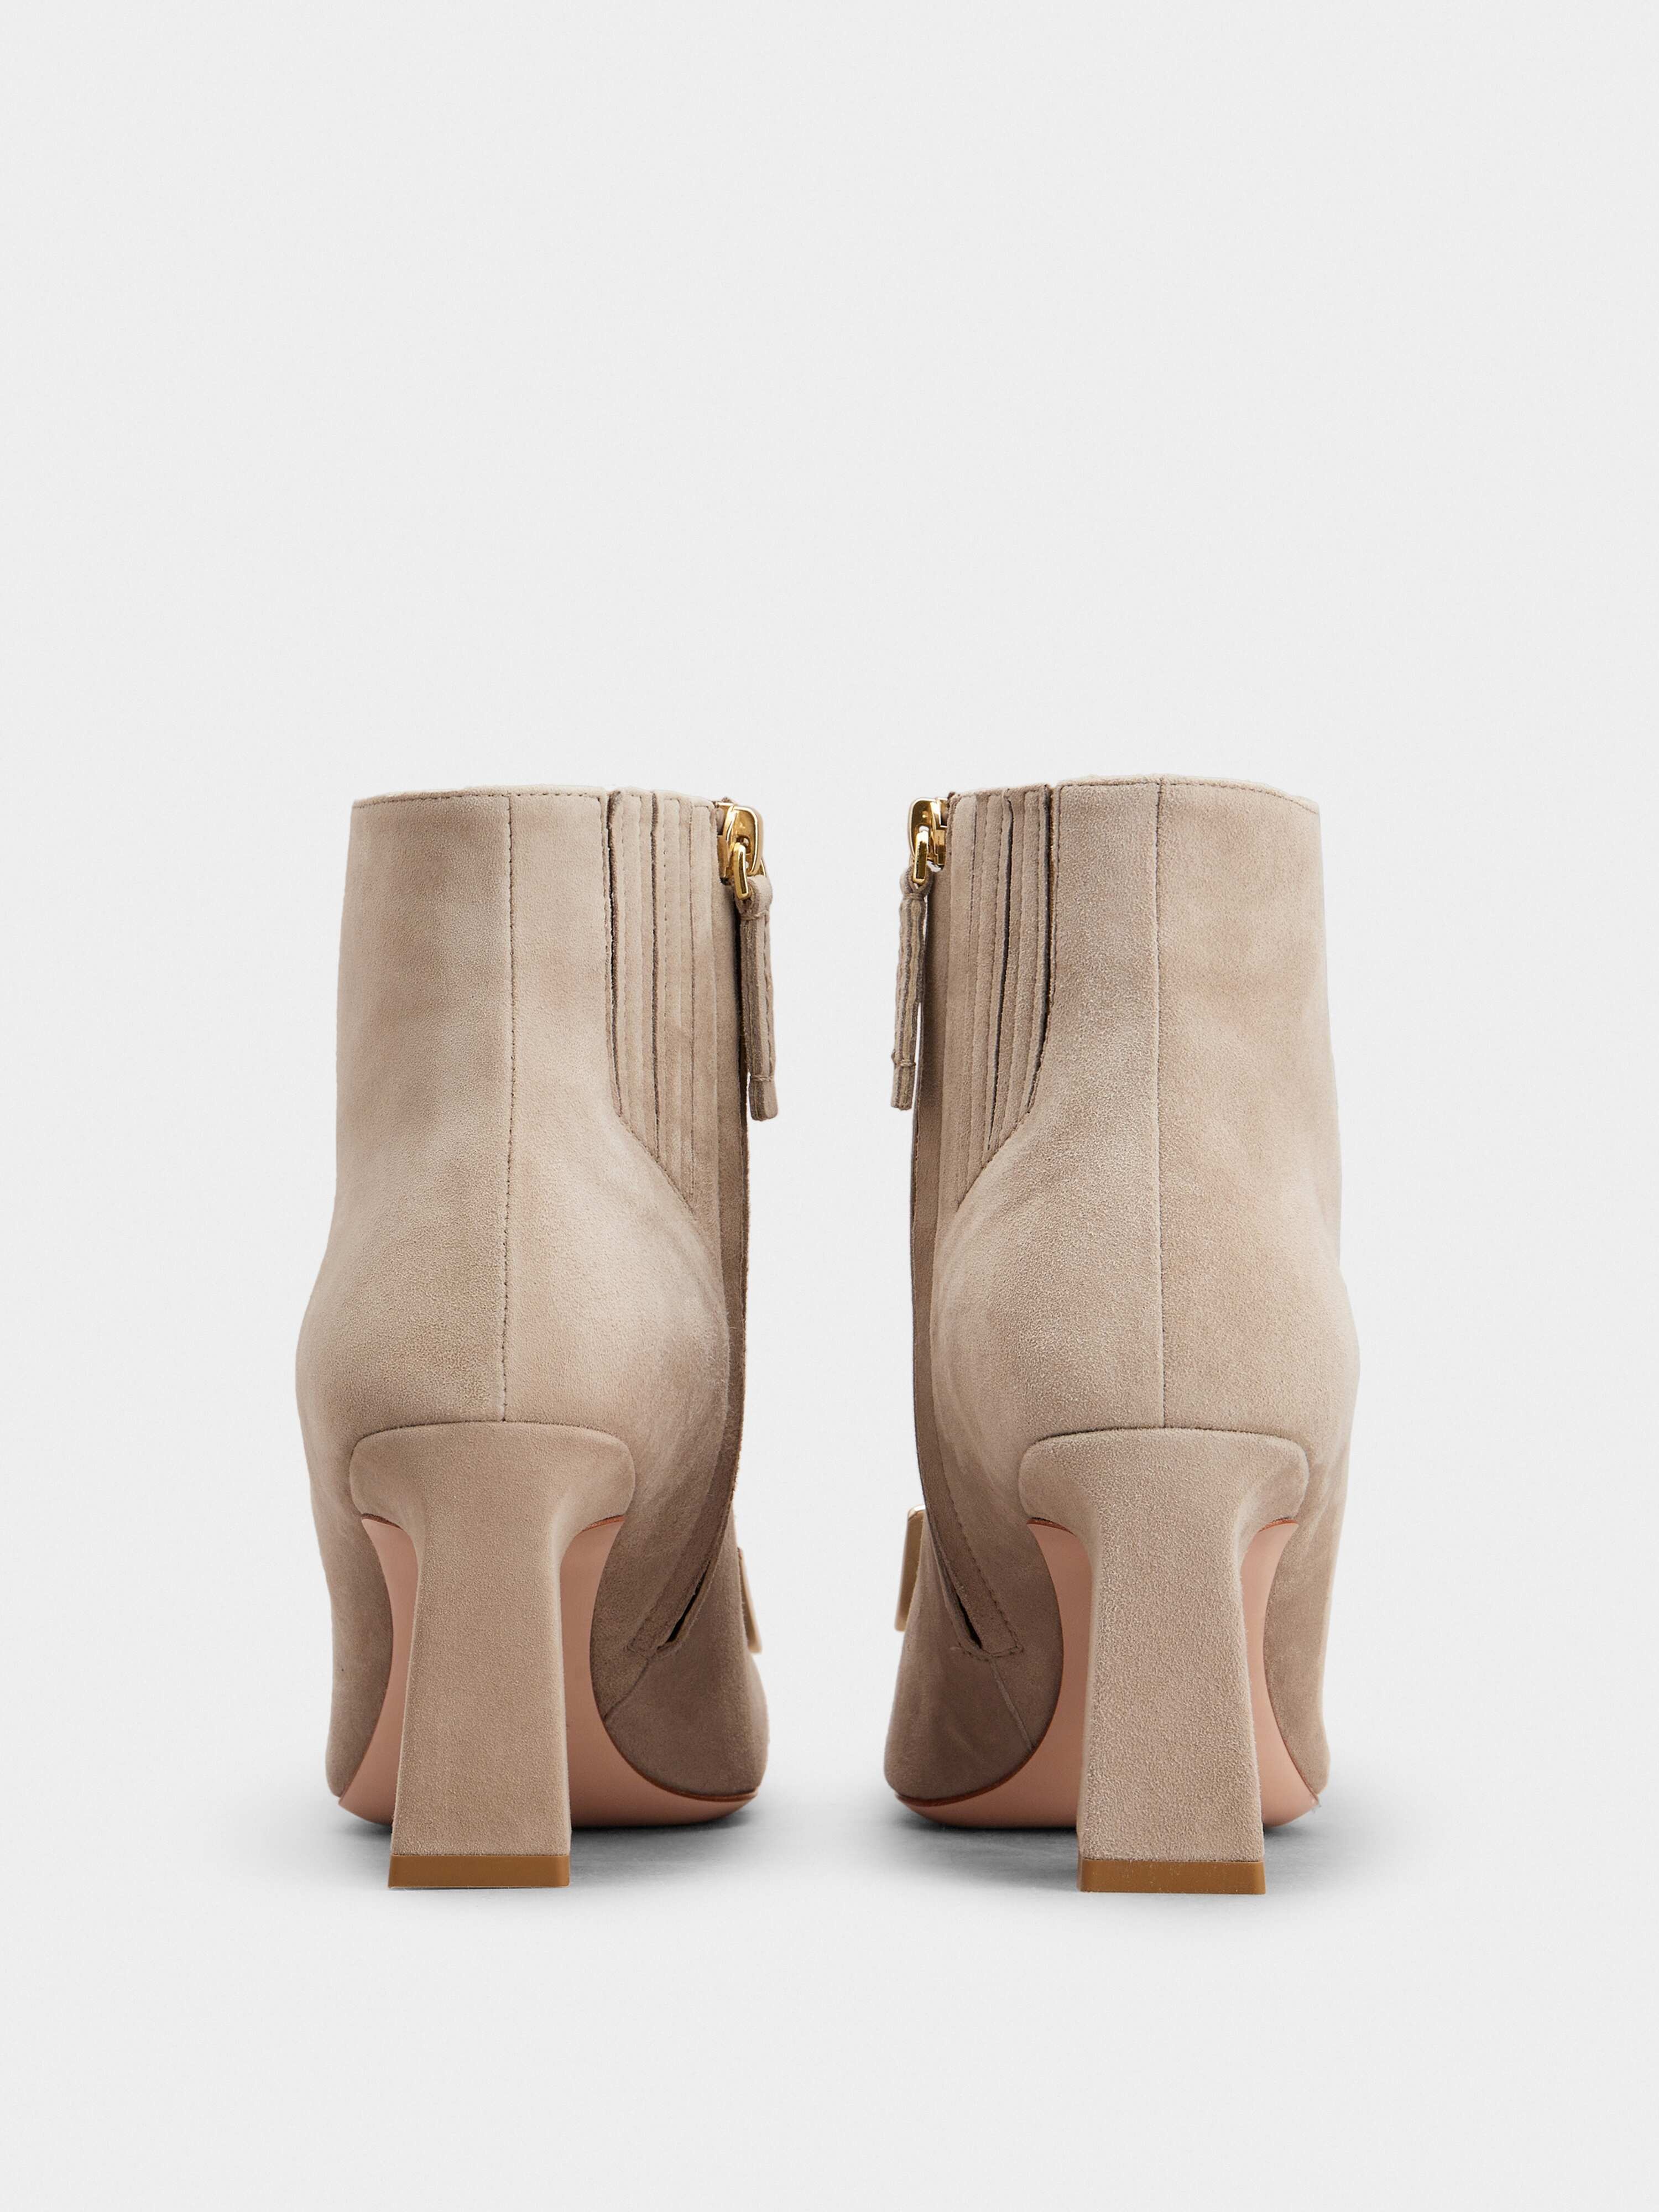 Viv' Square Metal Buckle Ankle Boots in Suede - 5